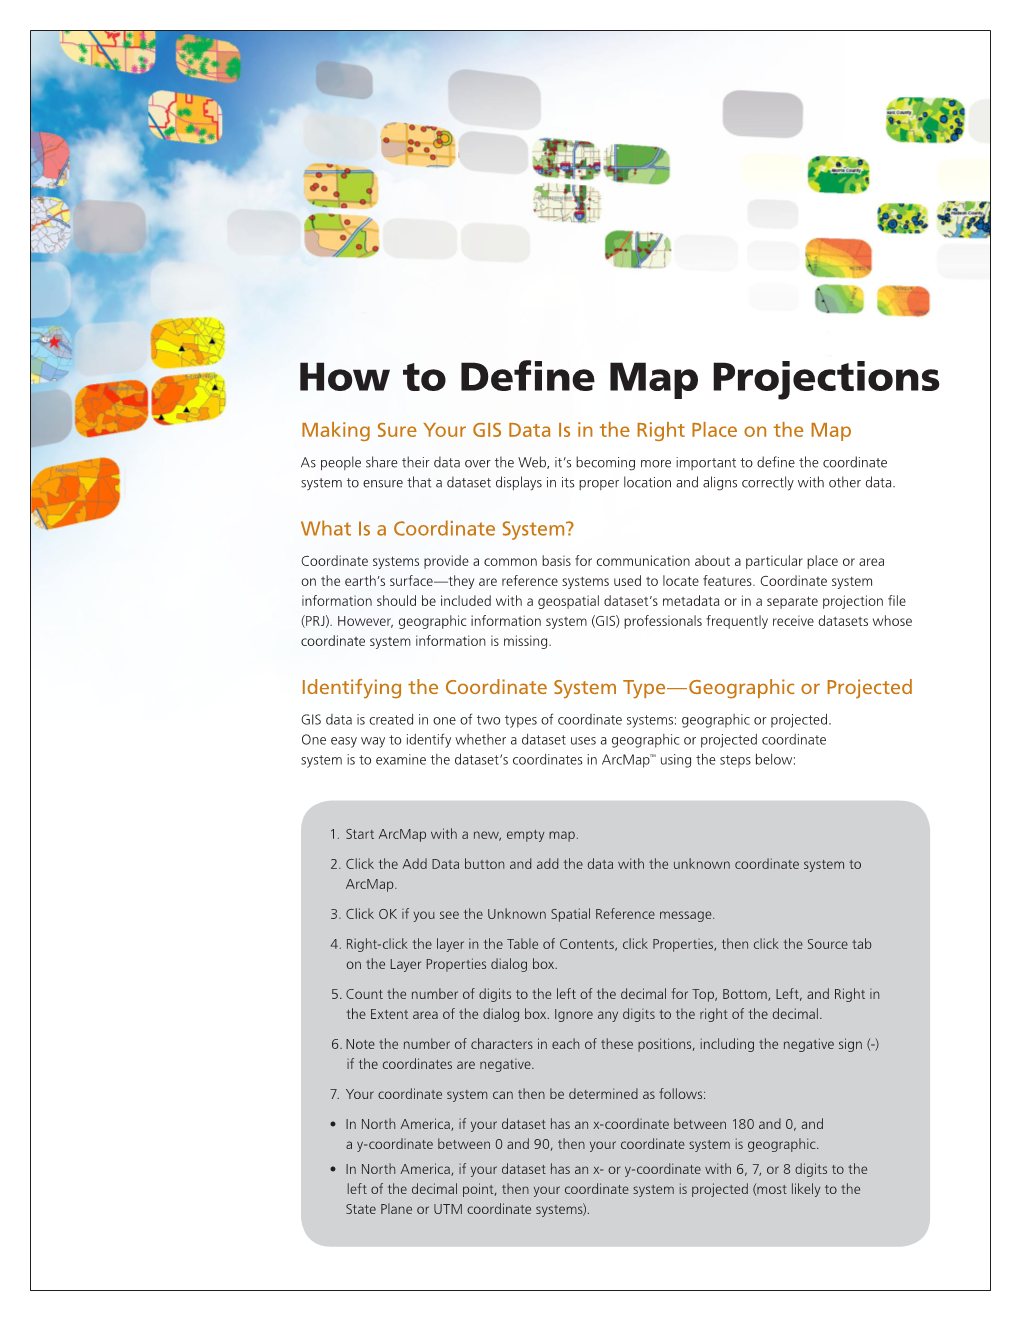 How to Define Map Projections